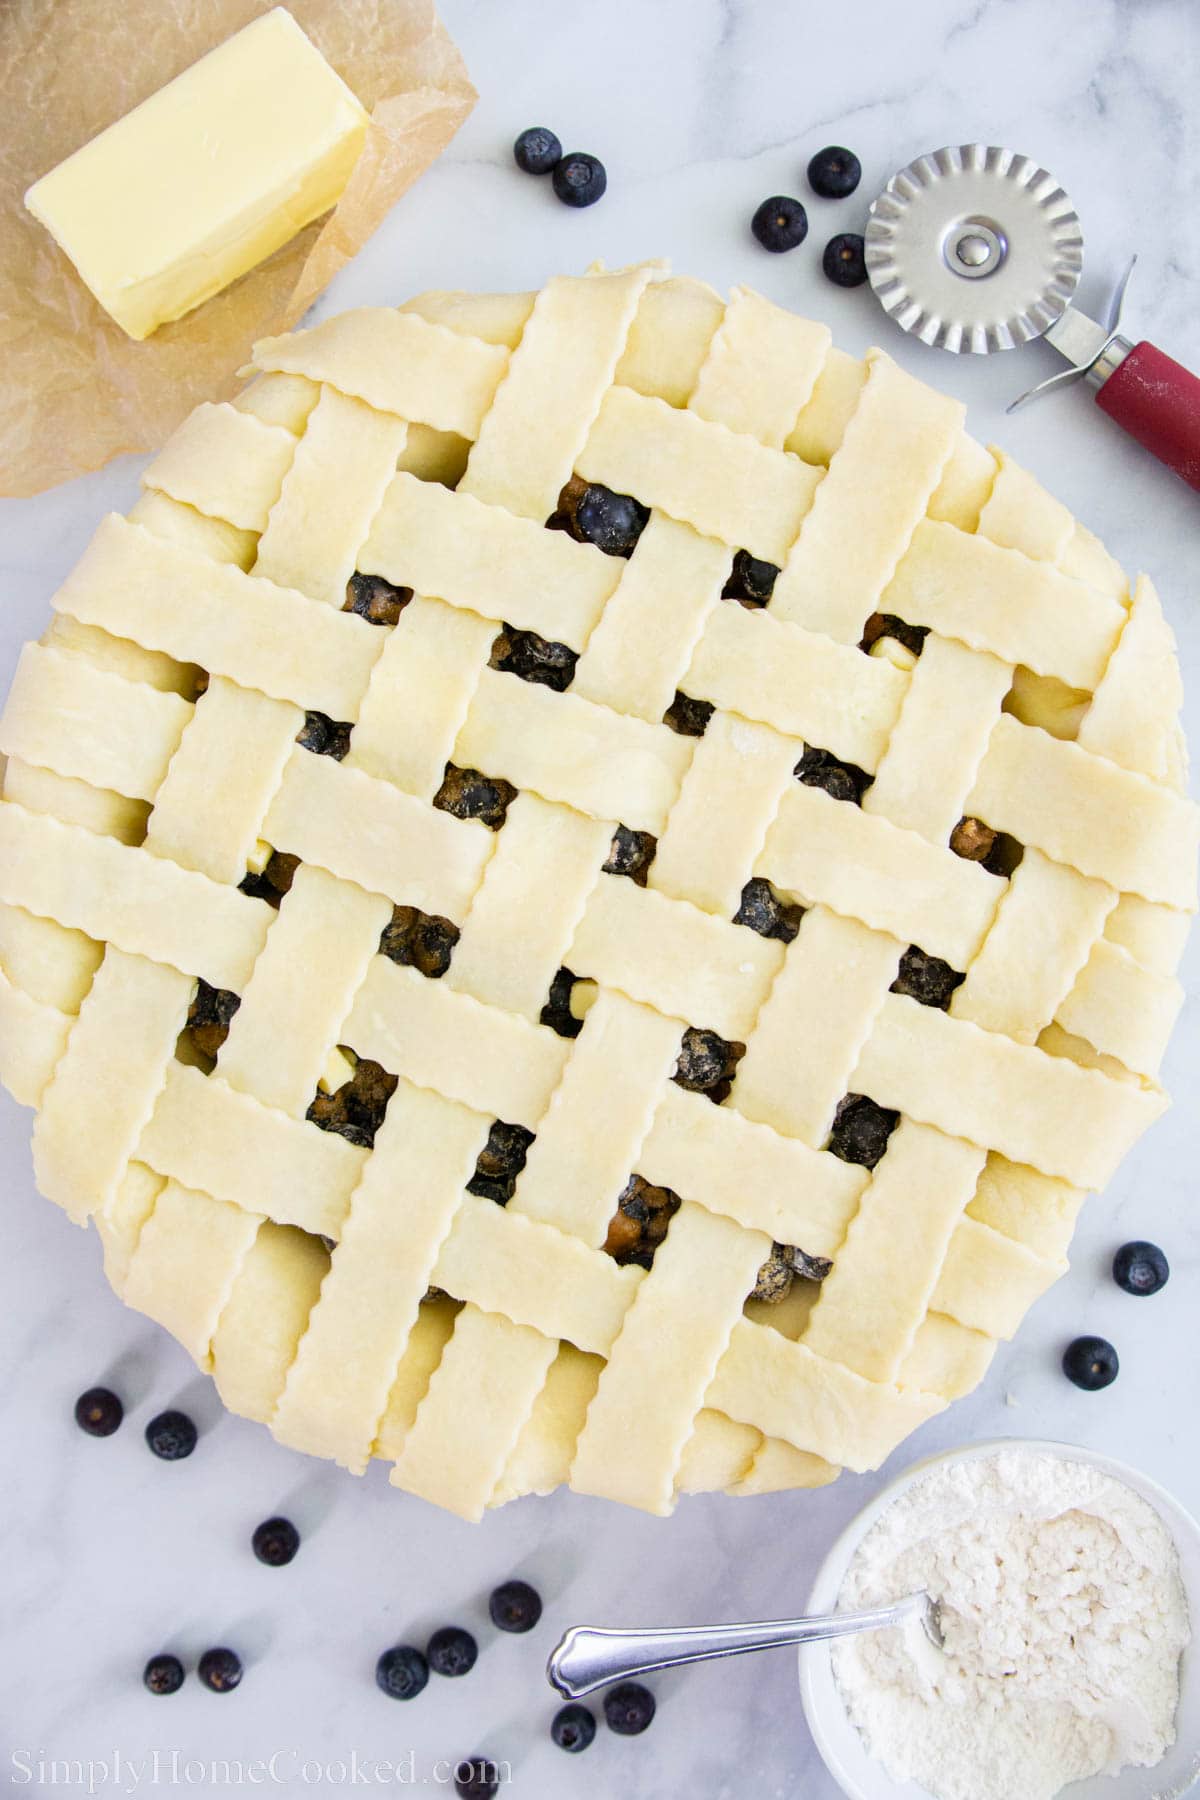 Blueberry Pie in a homemade pie crust with a lattice top.